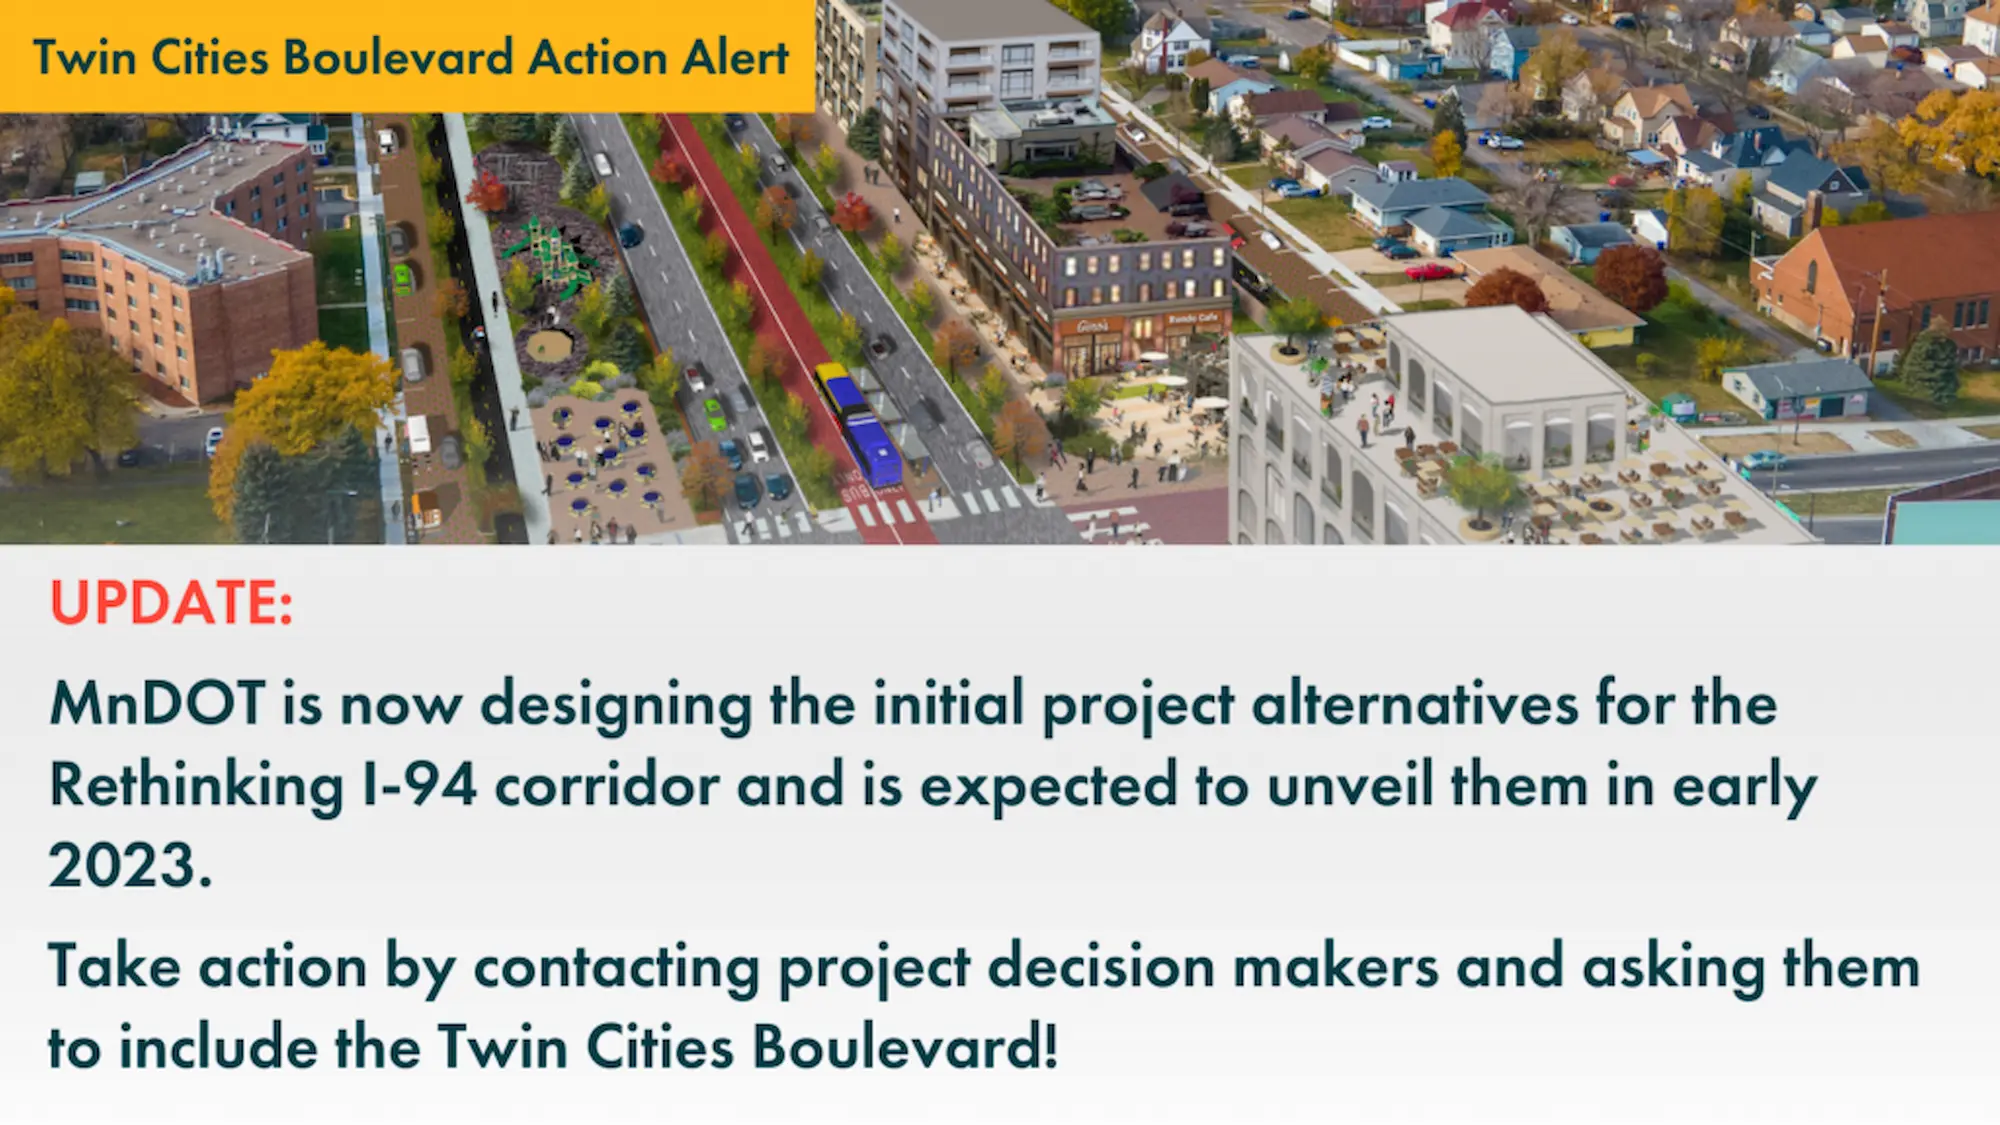 overhead shot of a redesigned city street with text asking to take action by contacting decision makers at MNDOT and asking them to include the Twin Cities Boulevard